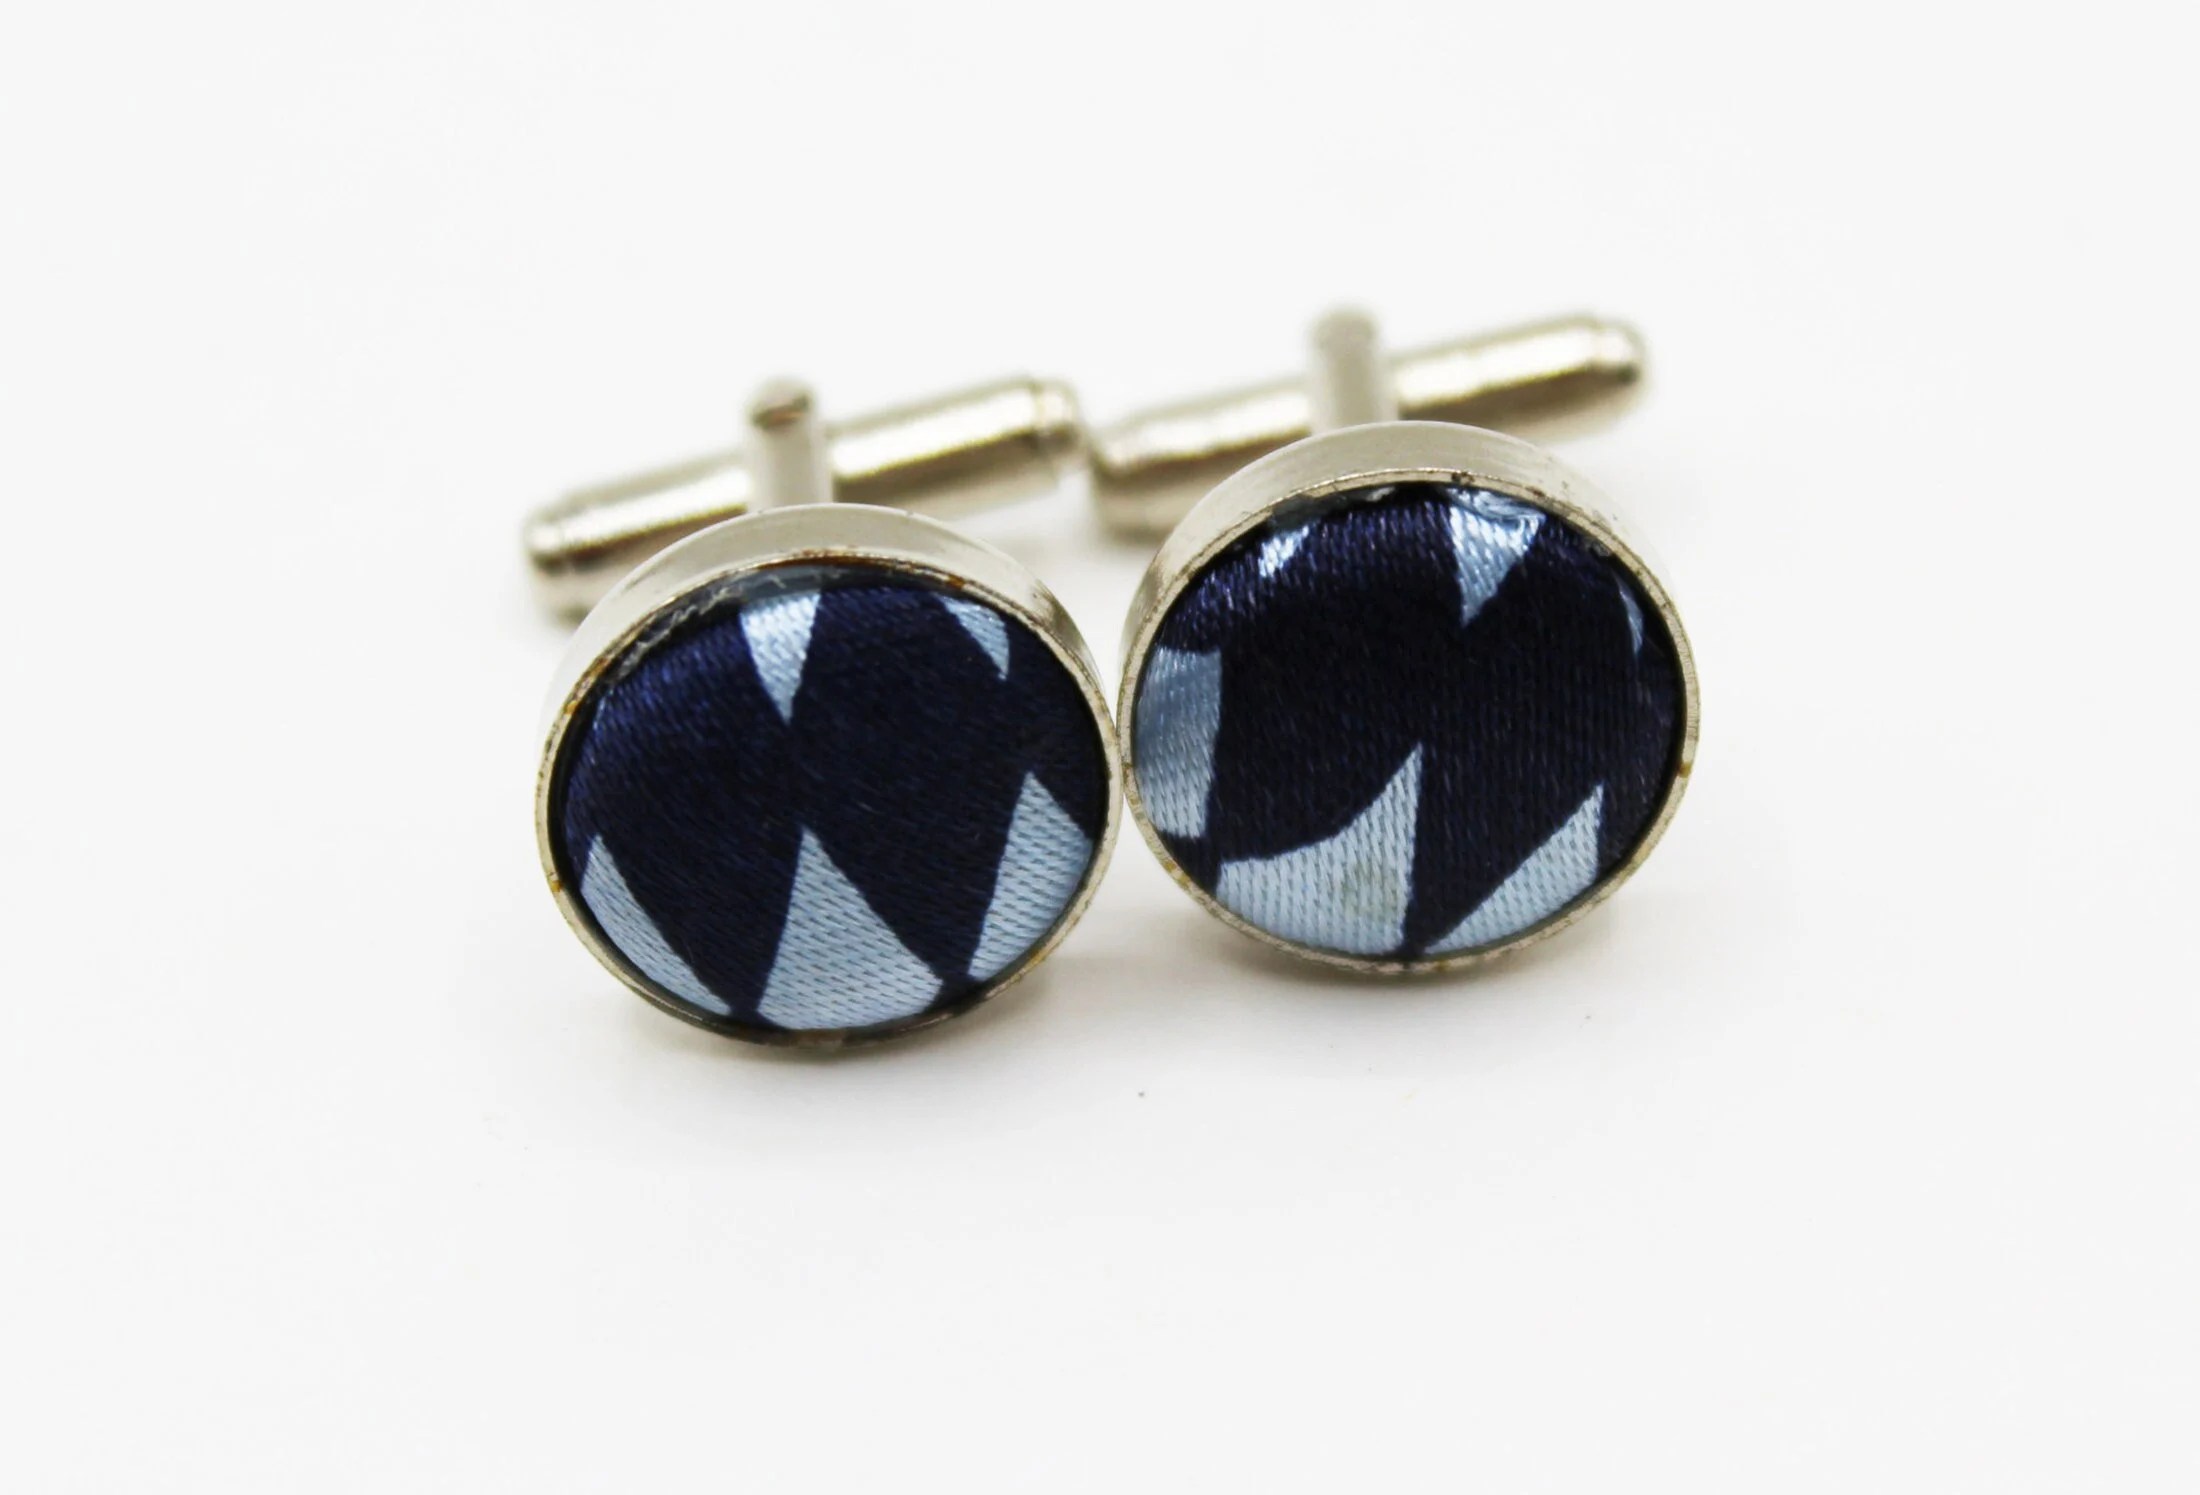 Vintage Handmade Two-Tone Blue Harlequin Fabric Covered Mens Cufflinks - Retro, Scholarly, Classic, Classroom, Museum, Library, Cuff Links